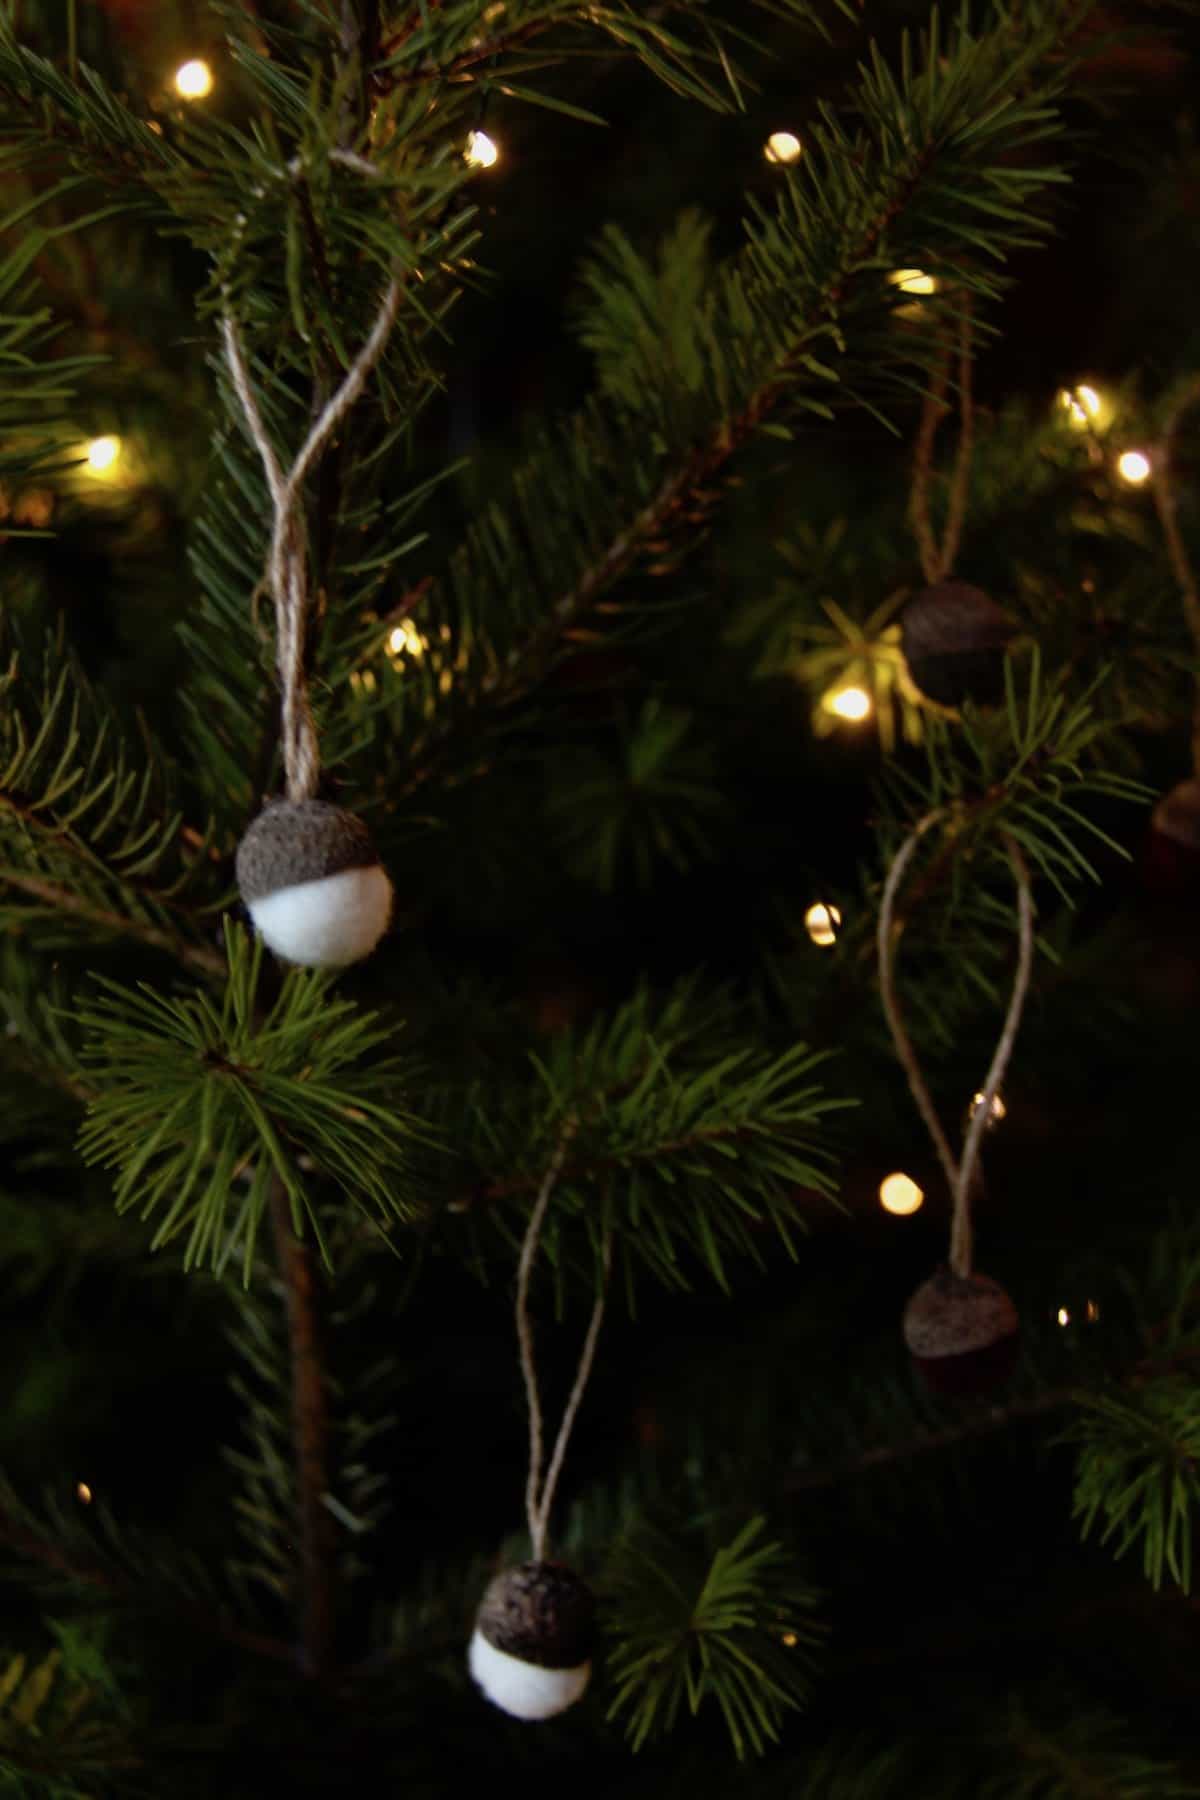 Wow! These are actually so easy to make. Here's how to make wool felt acorn tree ornaments for christmas #feltacorns #feltedacorns #woolacorns #wetfelting